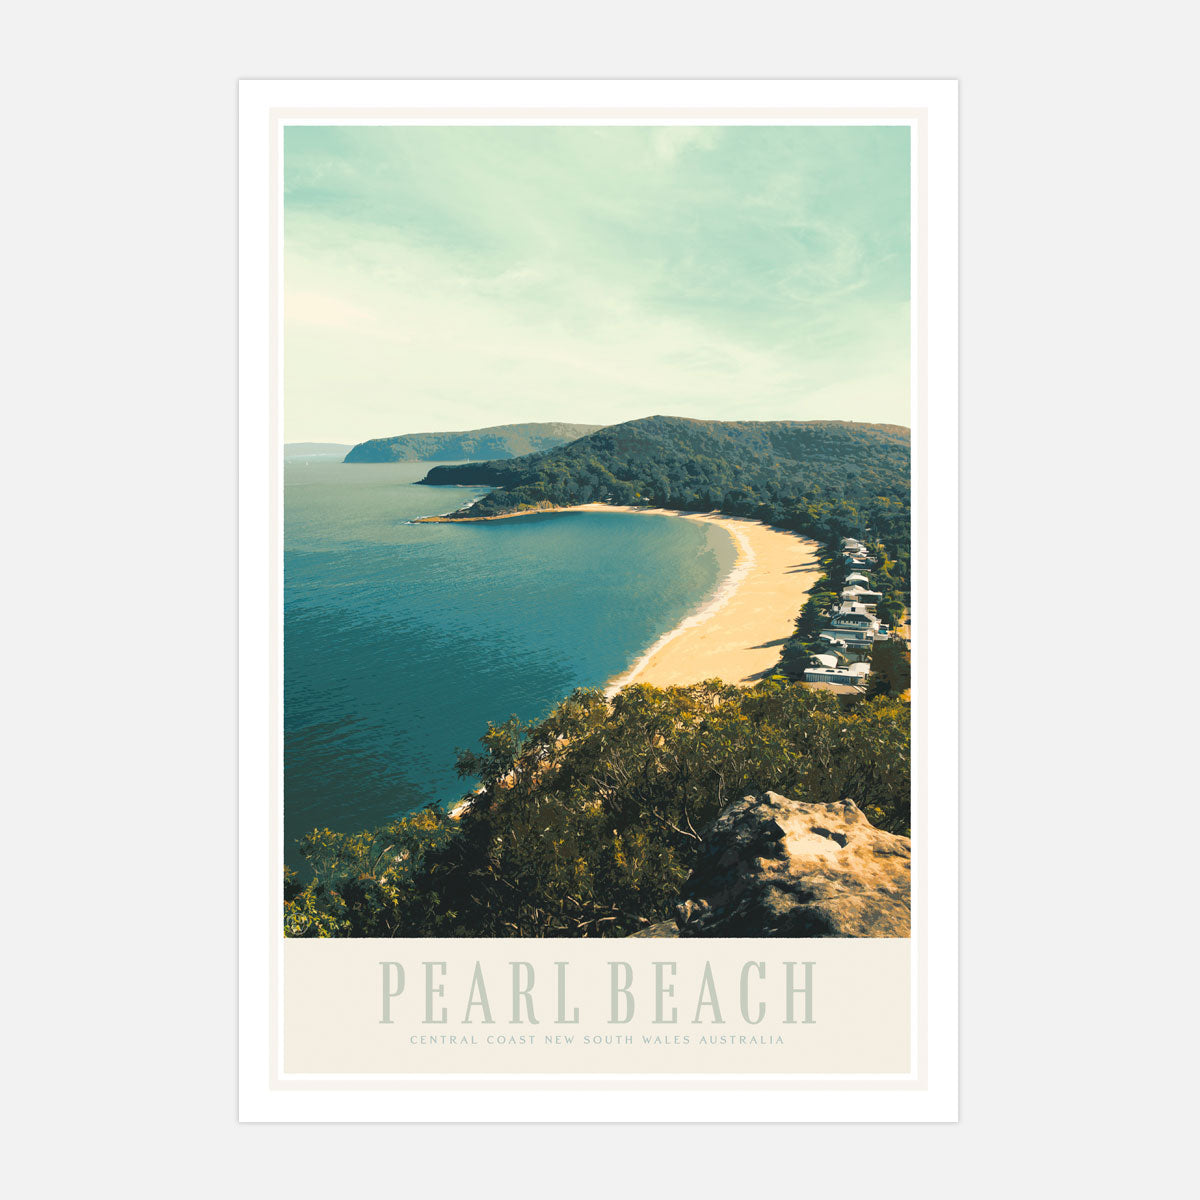 Pearl beach vintage travel print central coast by places we luv